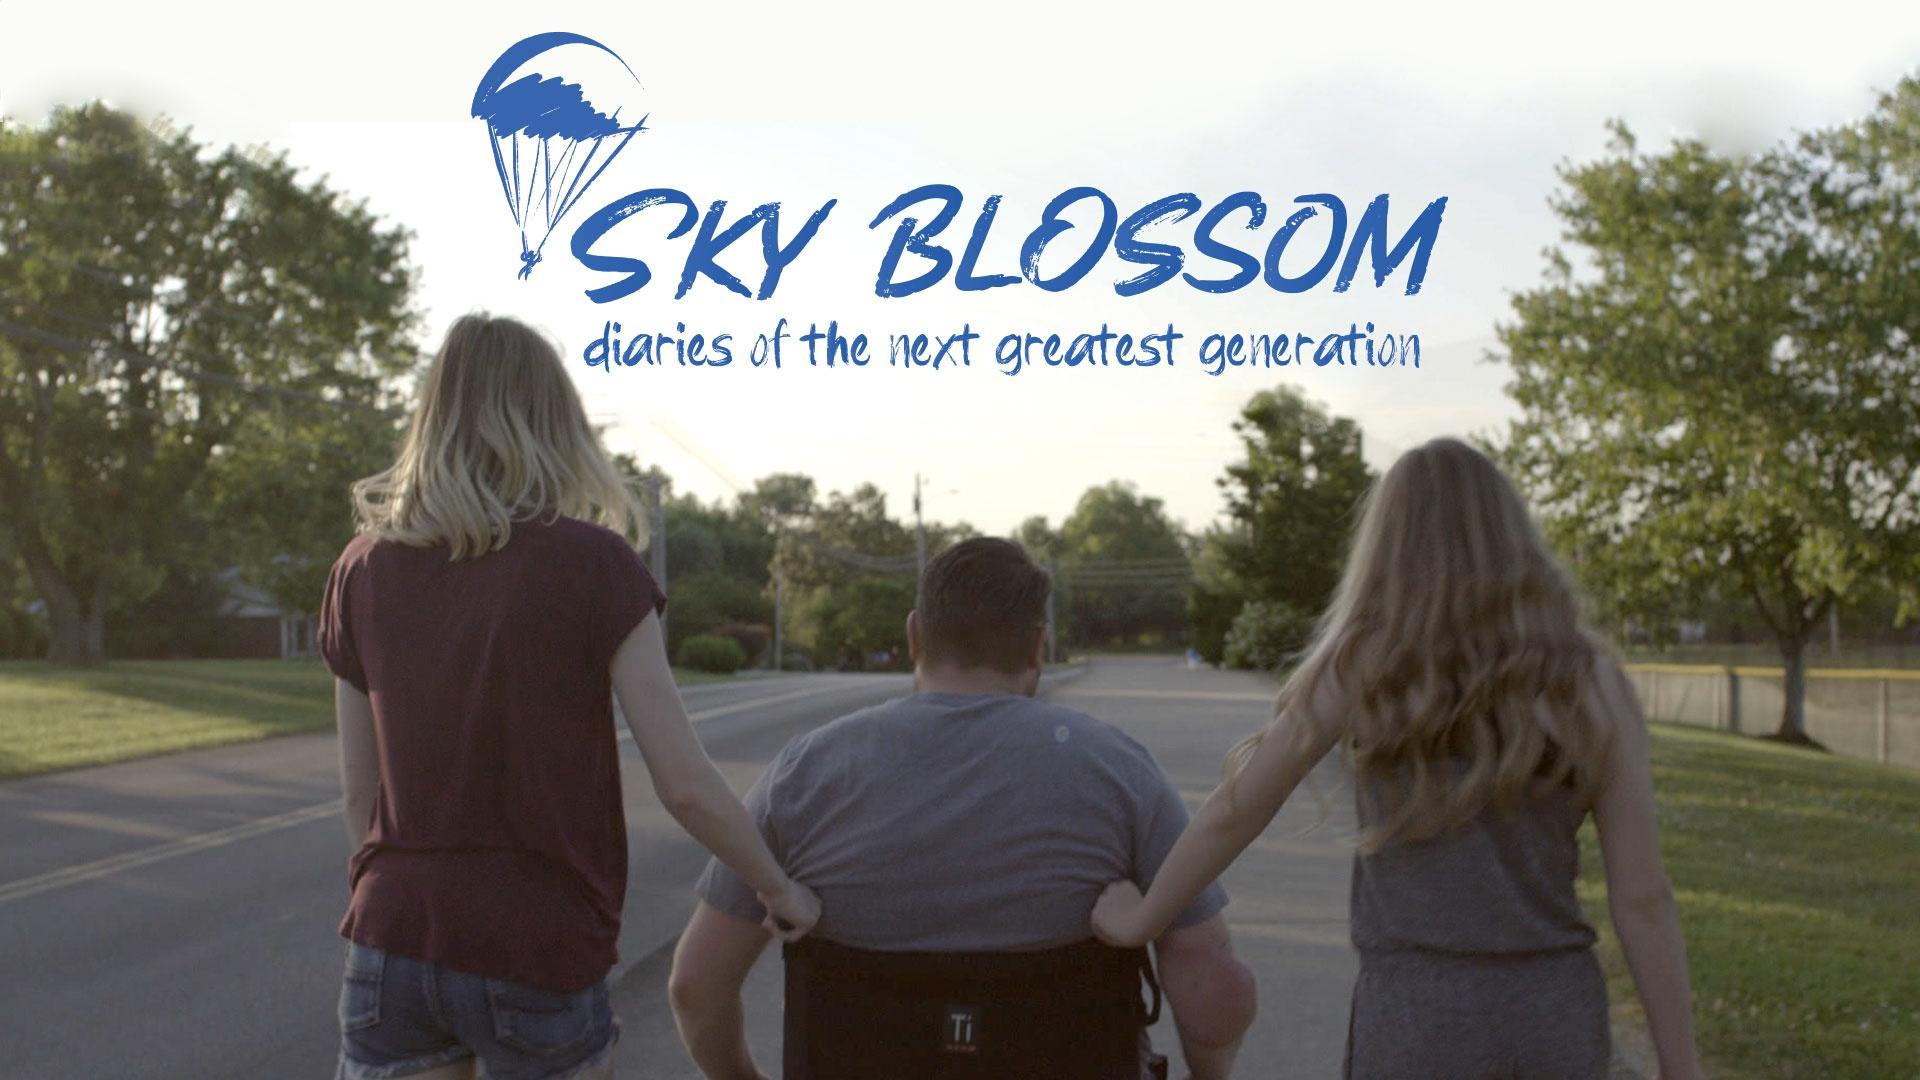 Sky Blossom: Diaries of the Next Greatest Generation